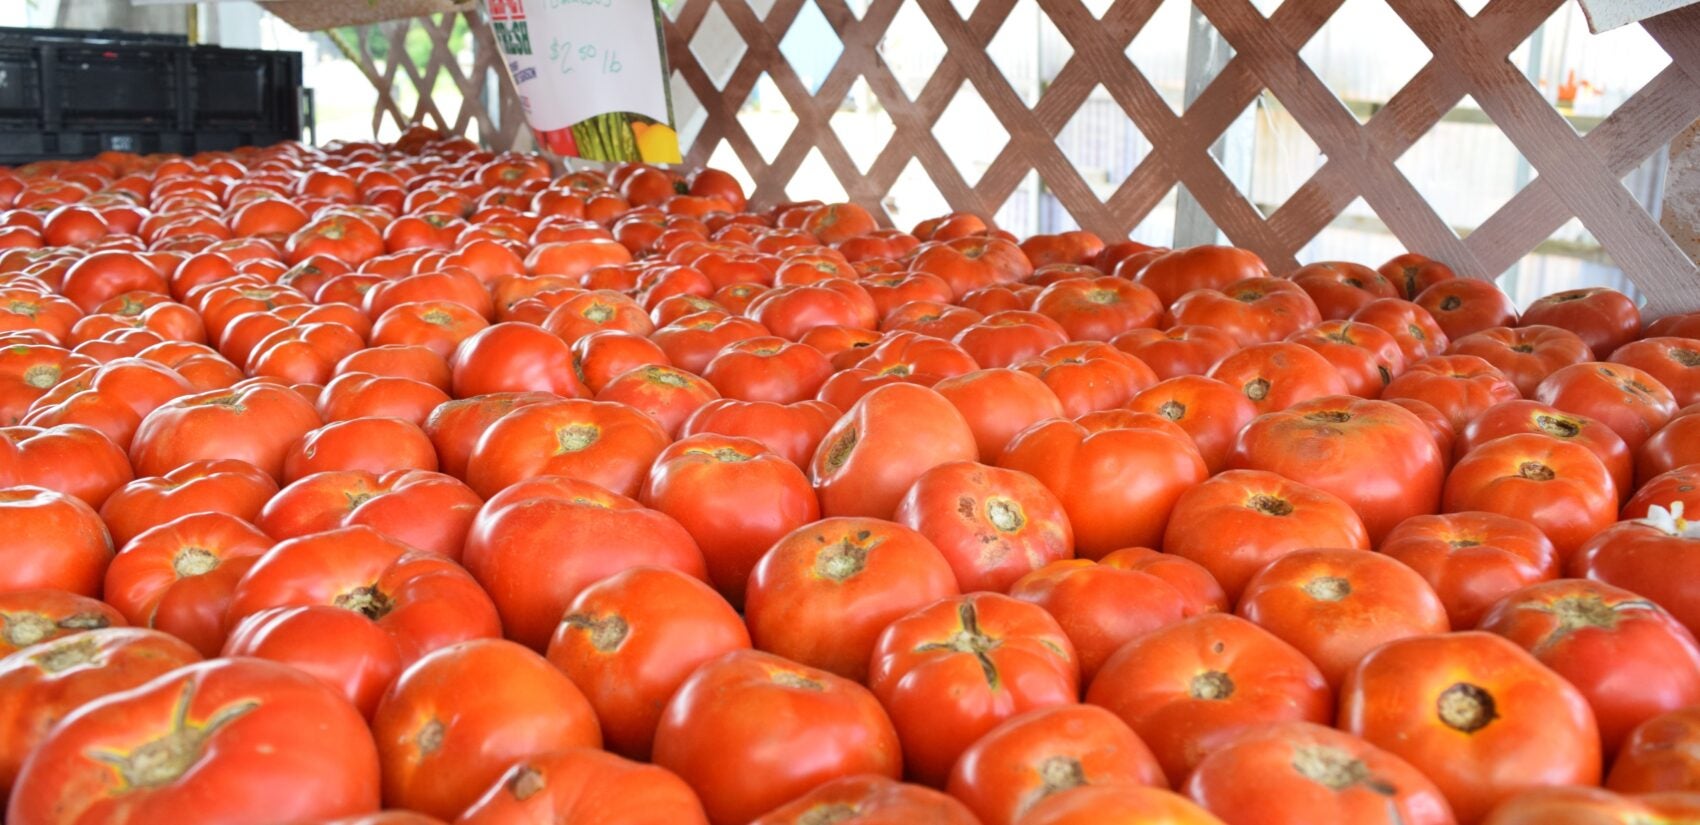 World-famous Jersey tomatoes will arrive at markets next week. (New Jersey Department of Agriculture)